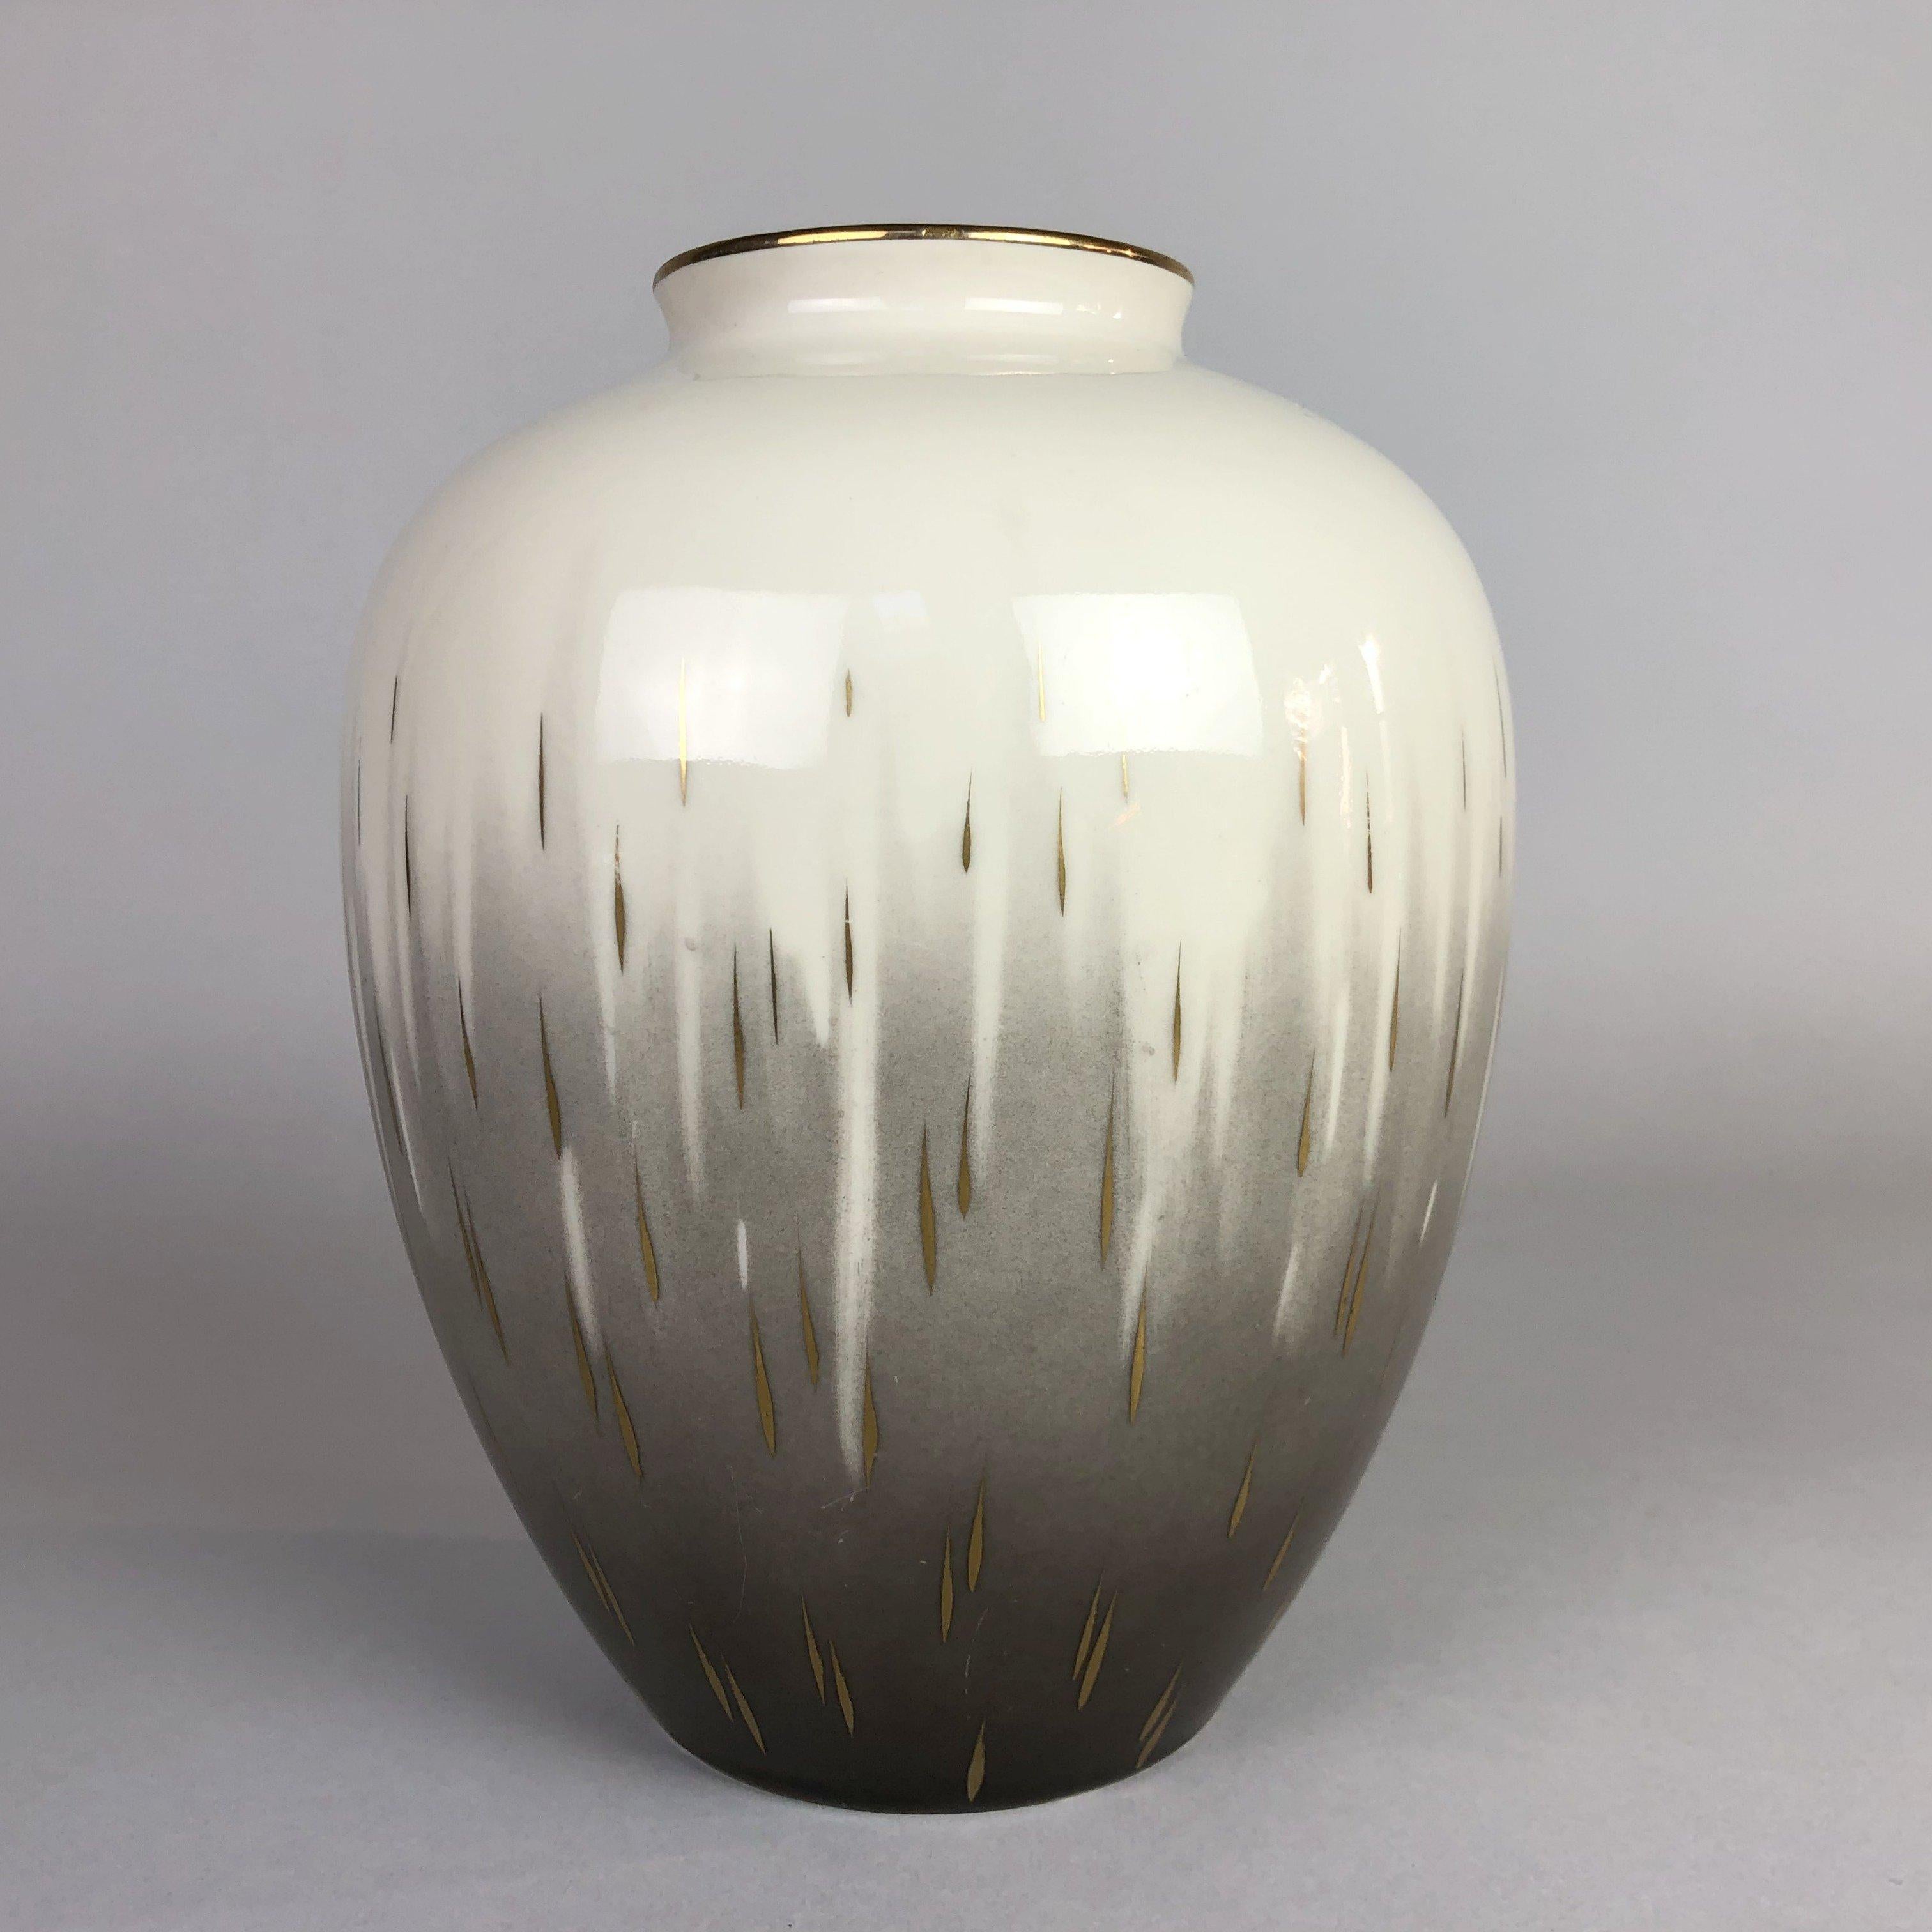 Beautiful vintage ceramic vase. White and grey colour with golden rim and other details, made by VEB Lichte in 1950's. Very good vintage condition with only slight signs of use.